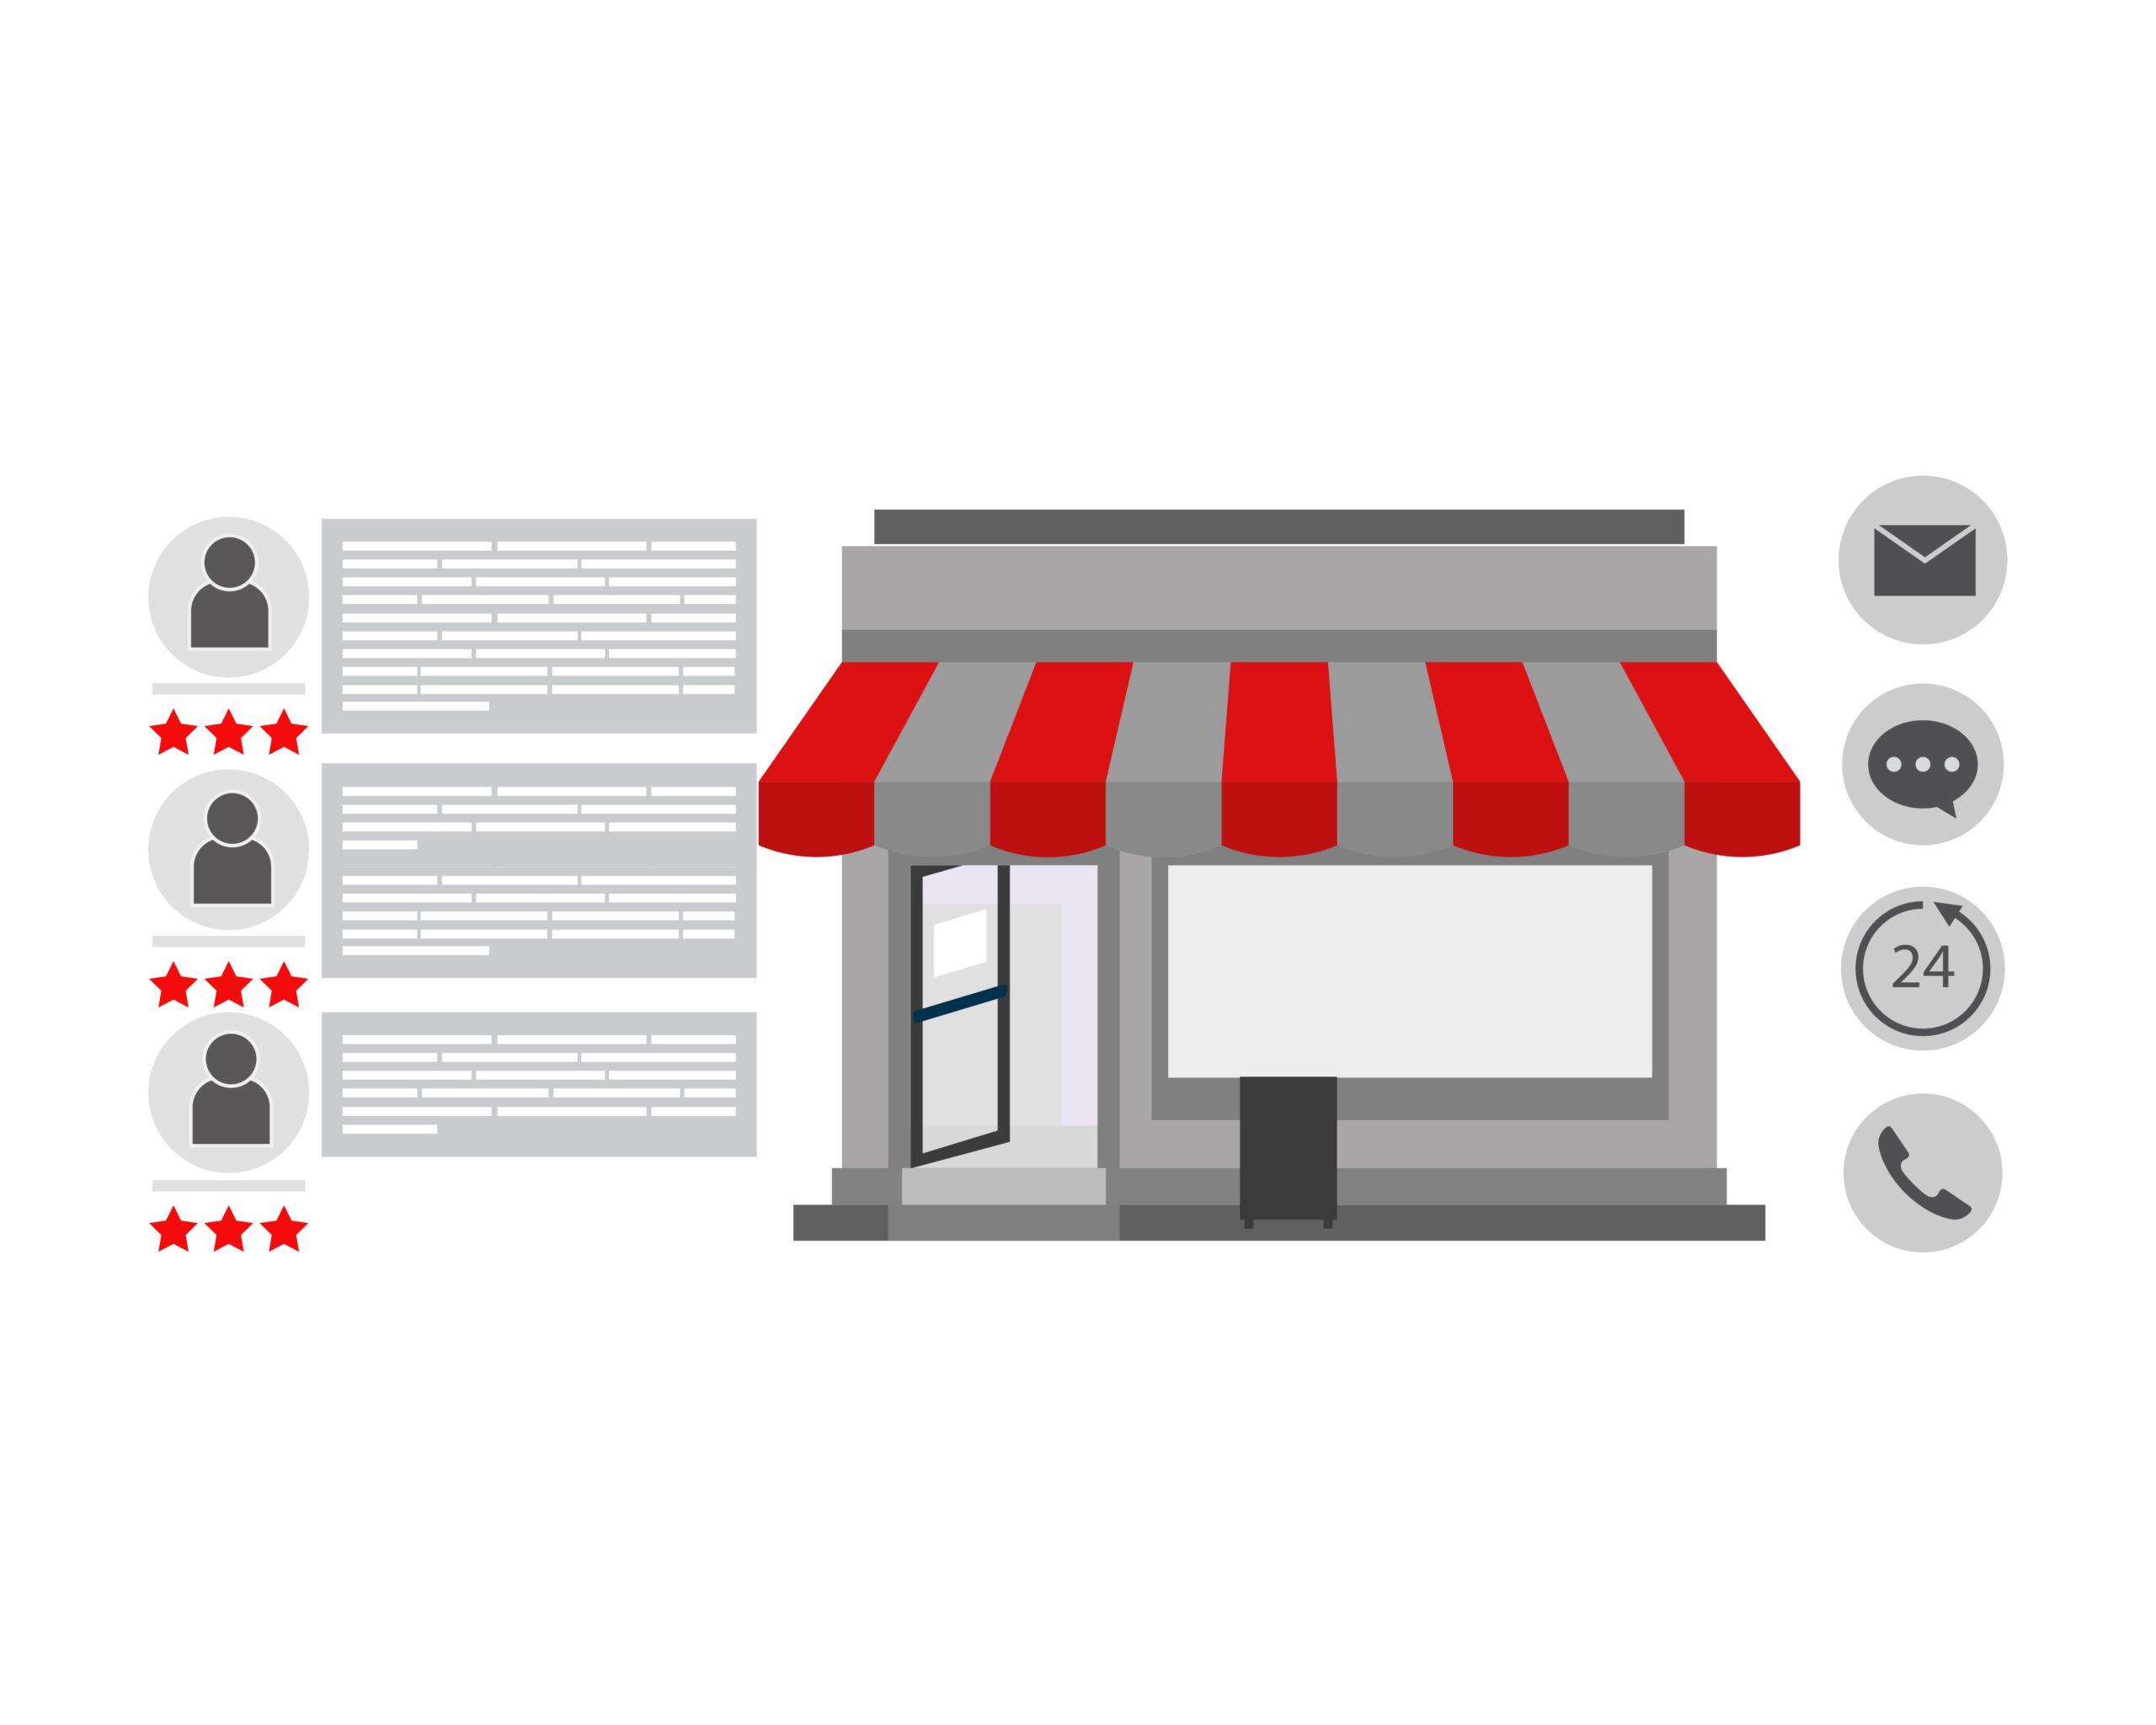 Want to give a seamless experience to your Customers at your Retail Store?